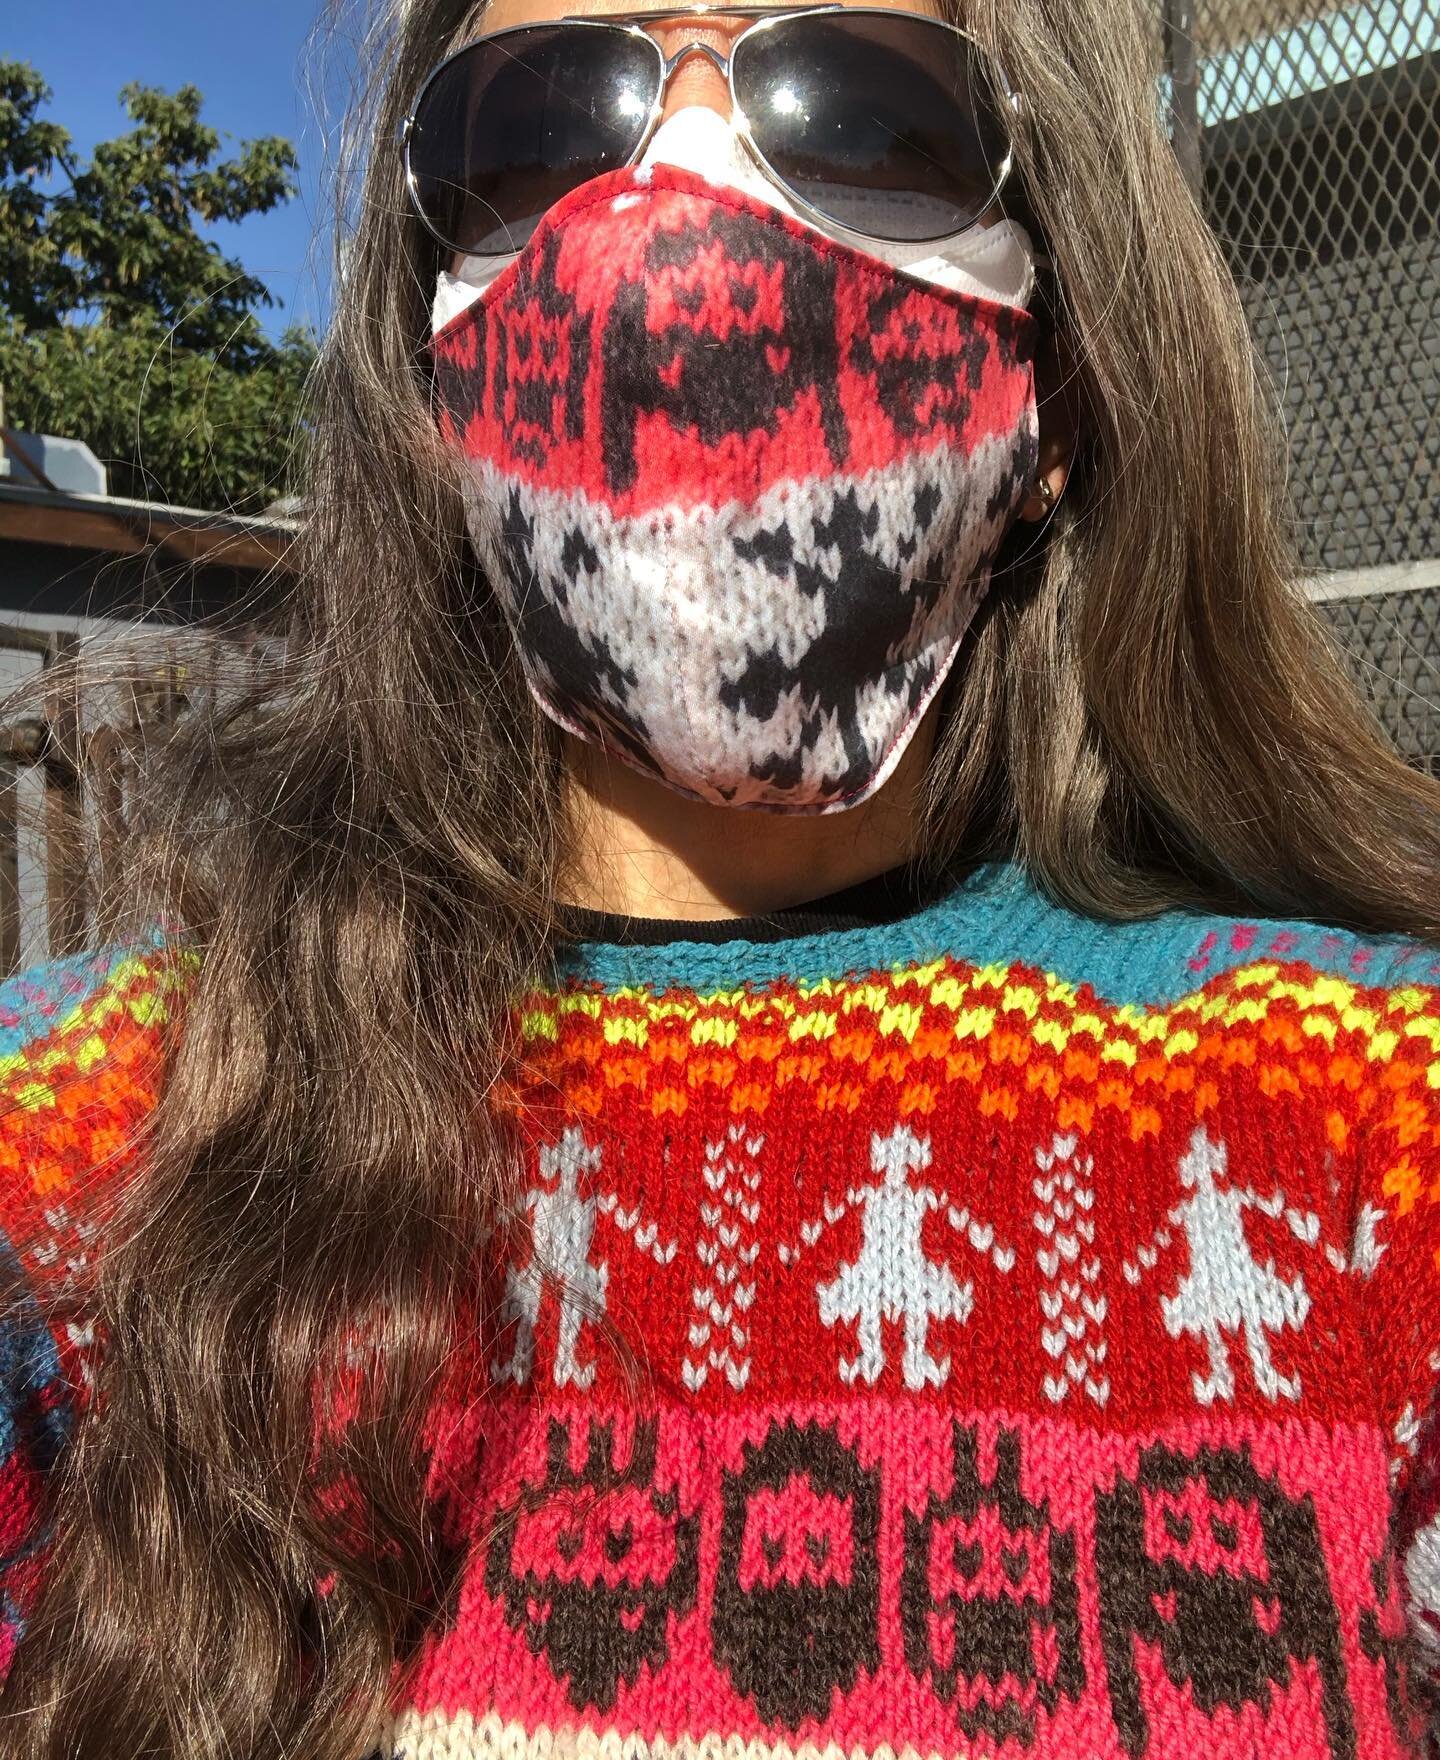 With so much going on, it&rsquo;s hard to remember sometimes that we&rsquo;re also in a global pandemic! Double masking (just like double impeachment) is all the rage these days, especially when the outer mask matches the sweater! Matchy matchy masks